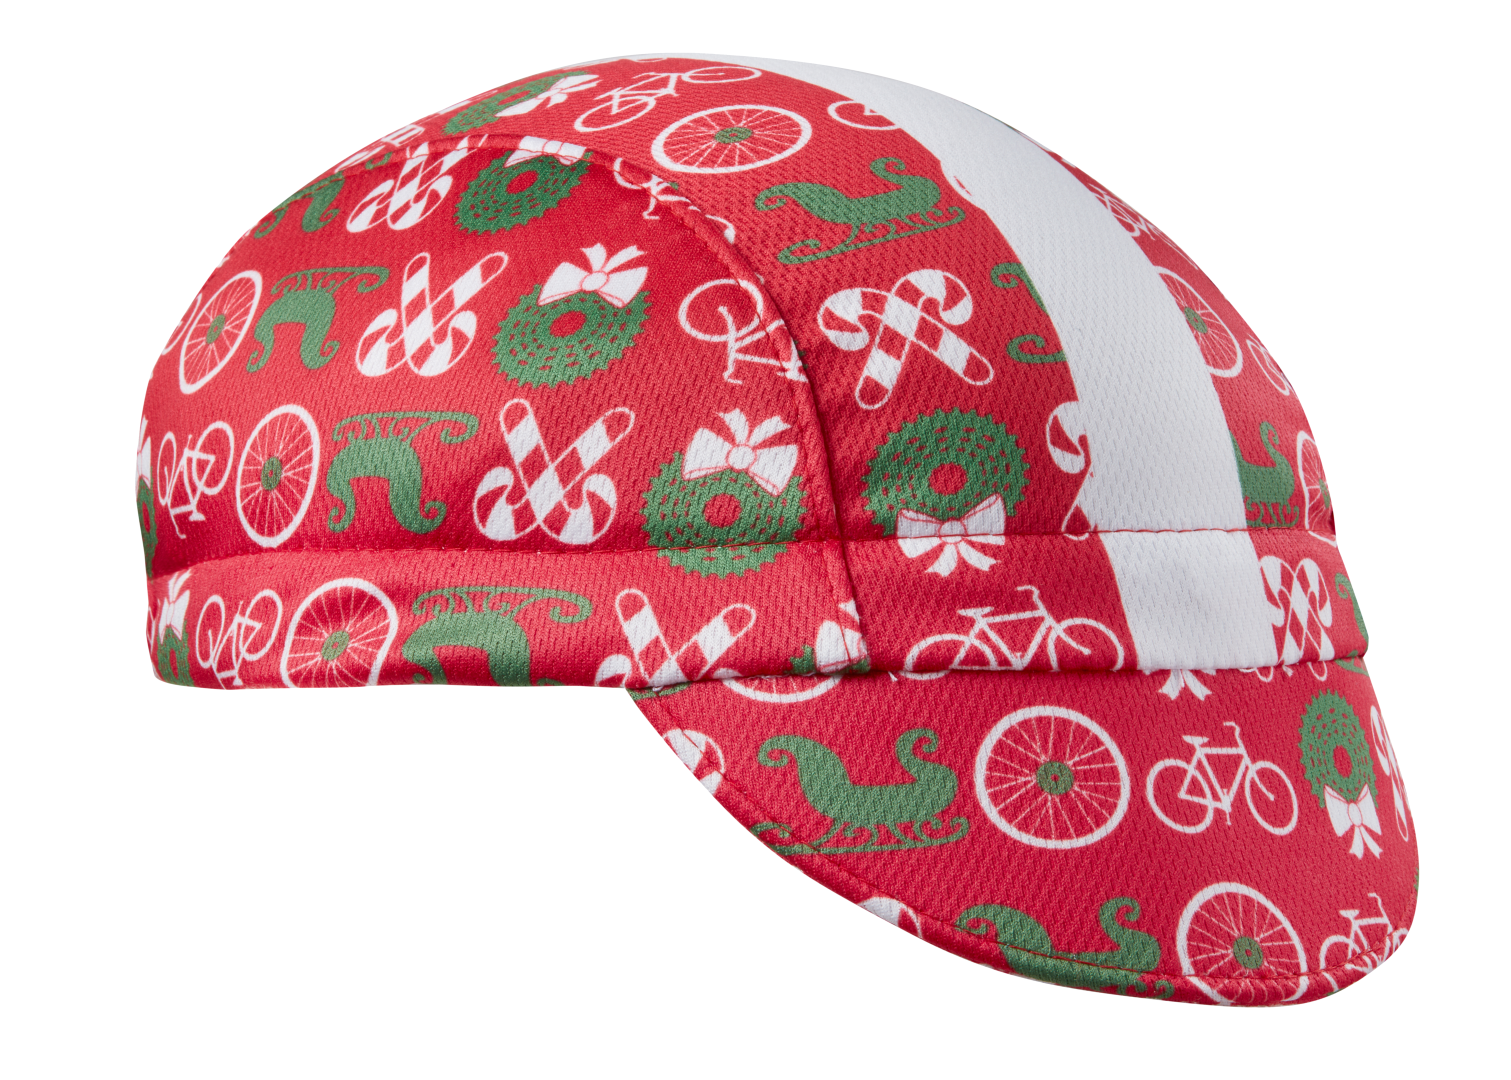 Festive Cap Technical 3-Panel Stripe.  Red Cap with White Stripe.  Bikes, Wreaths, Sleighs, and Candy Cane print.  Angled View.